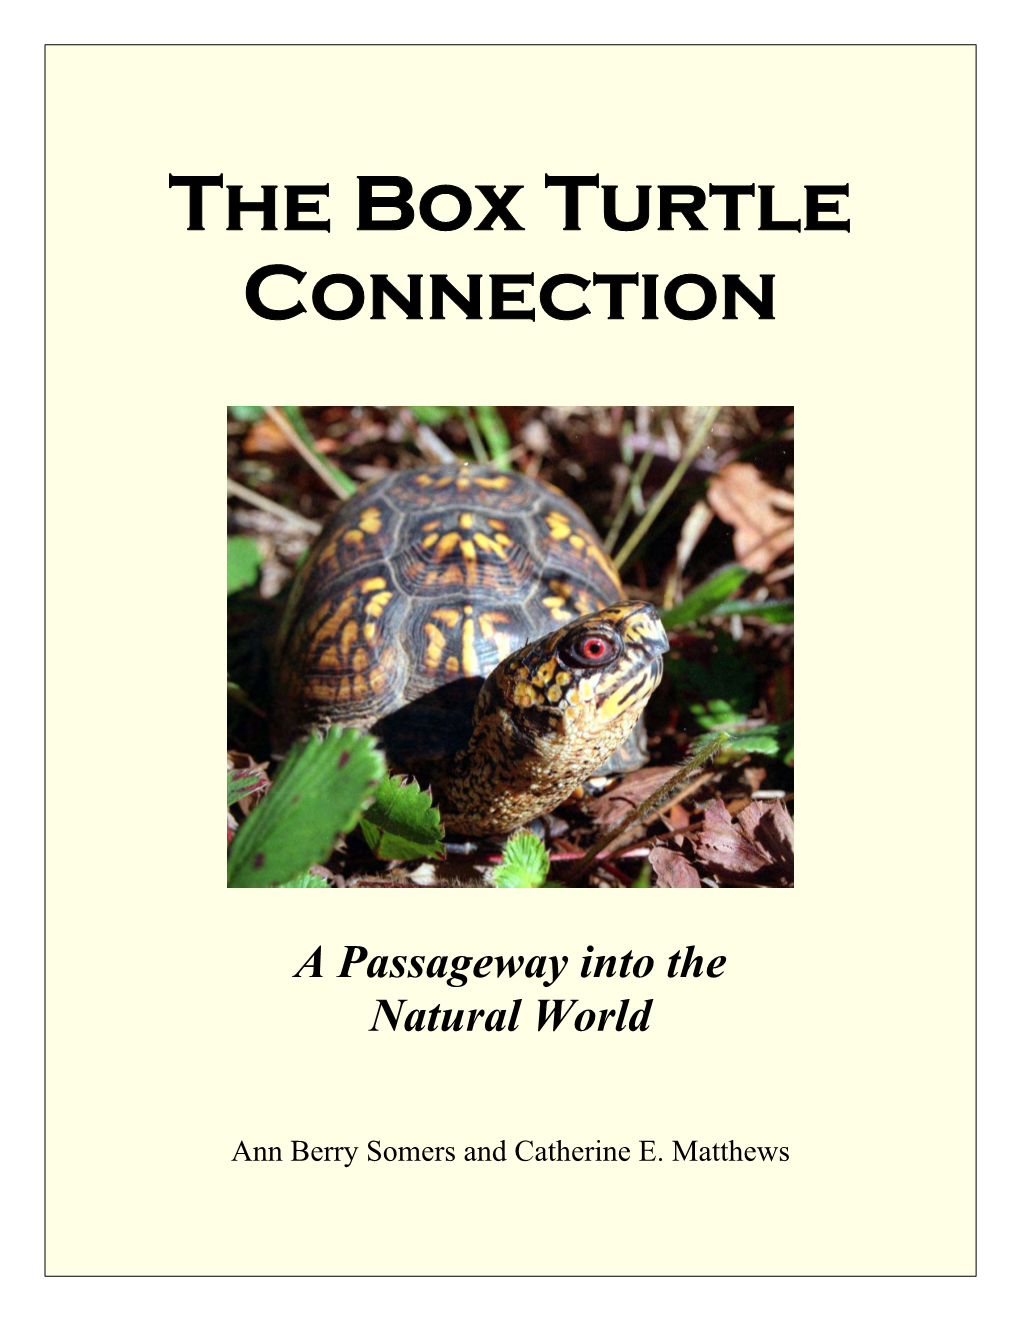 The Box Turtle Connection: a Passageway Into the Natural World